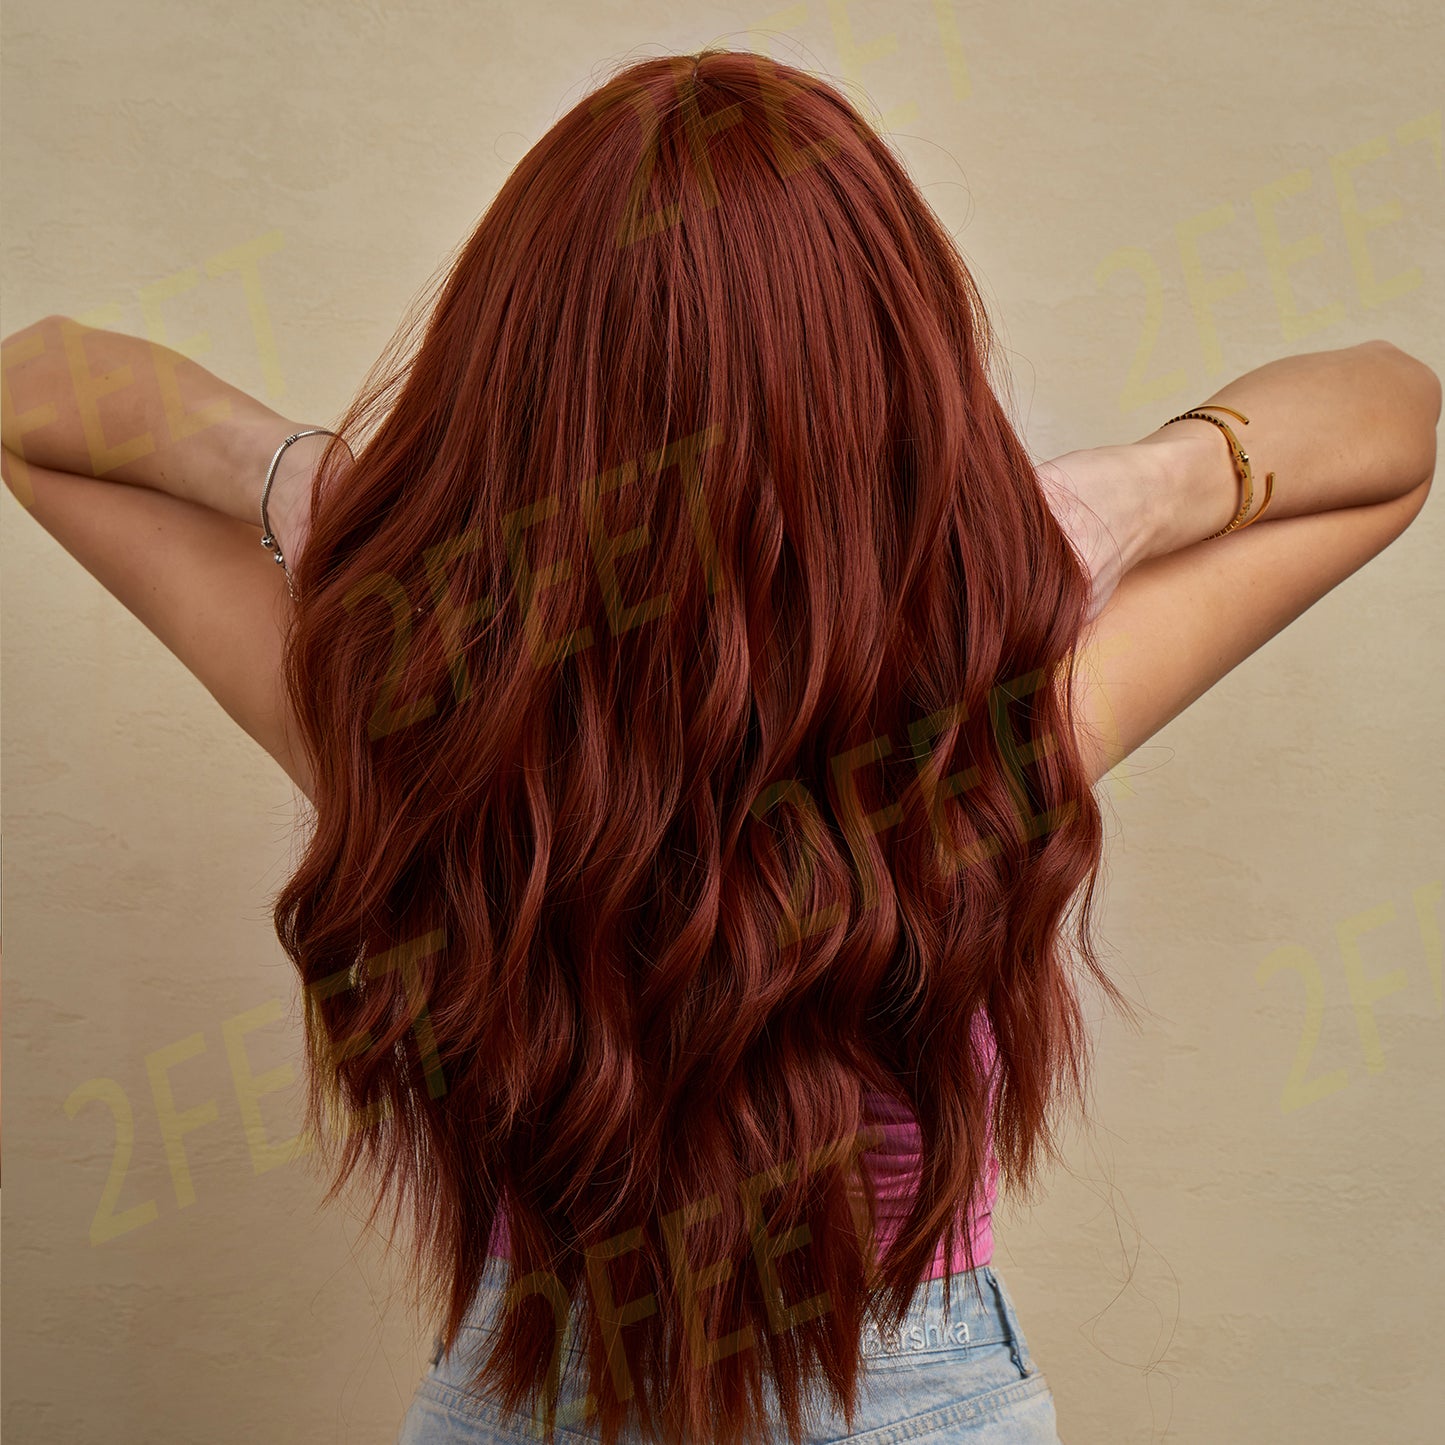 NO.5 2Feet-long curly red hair